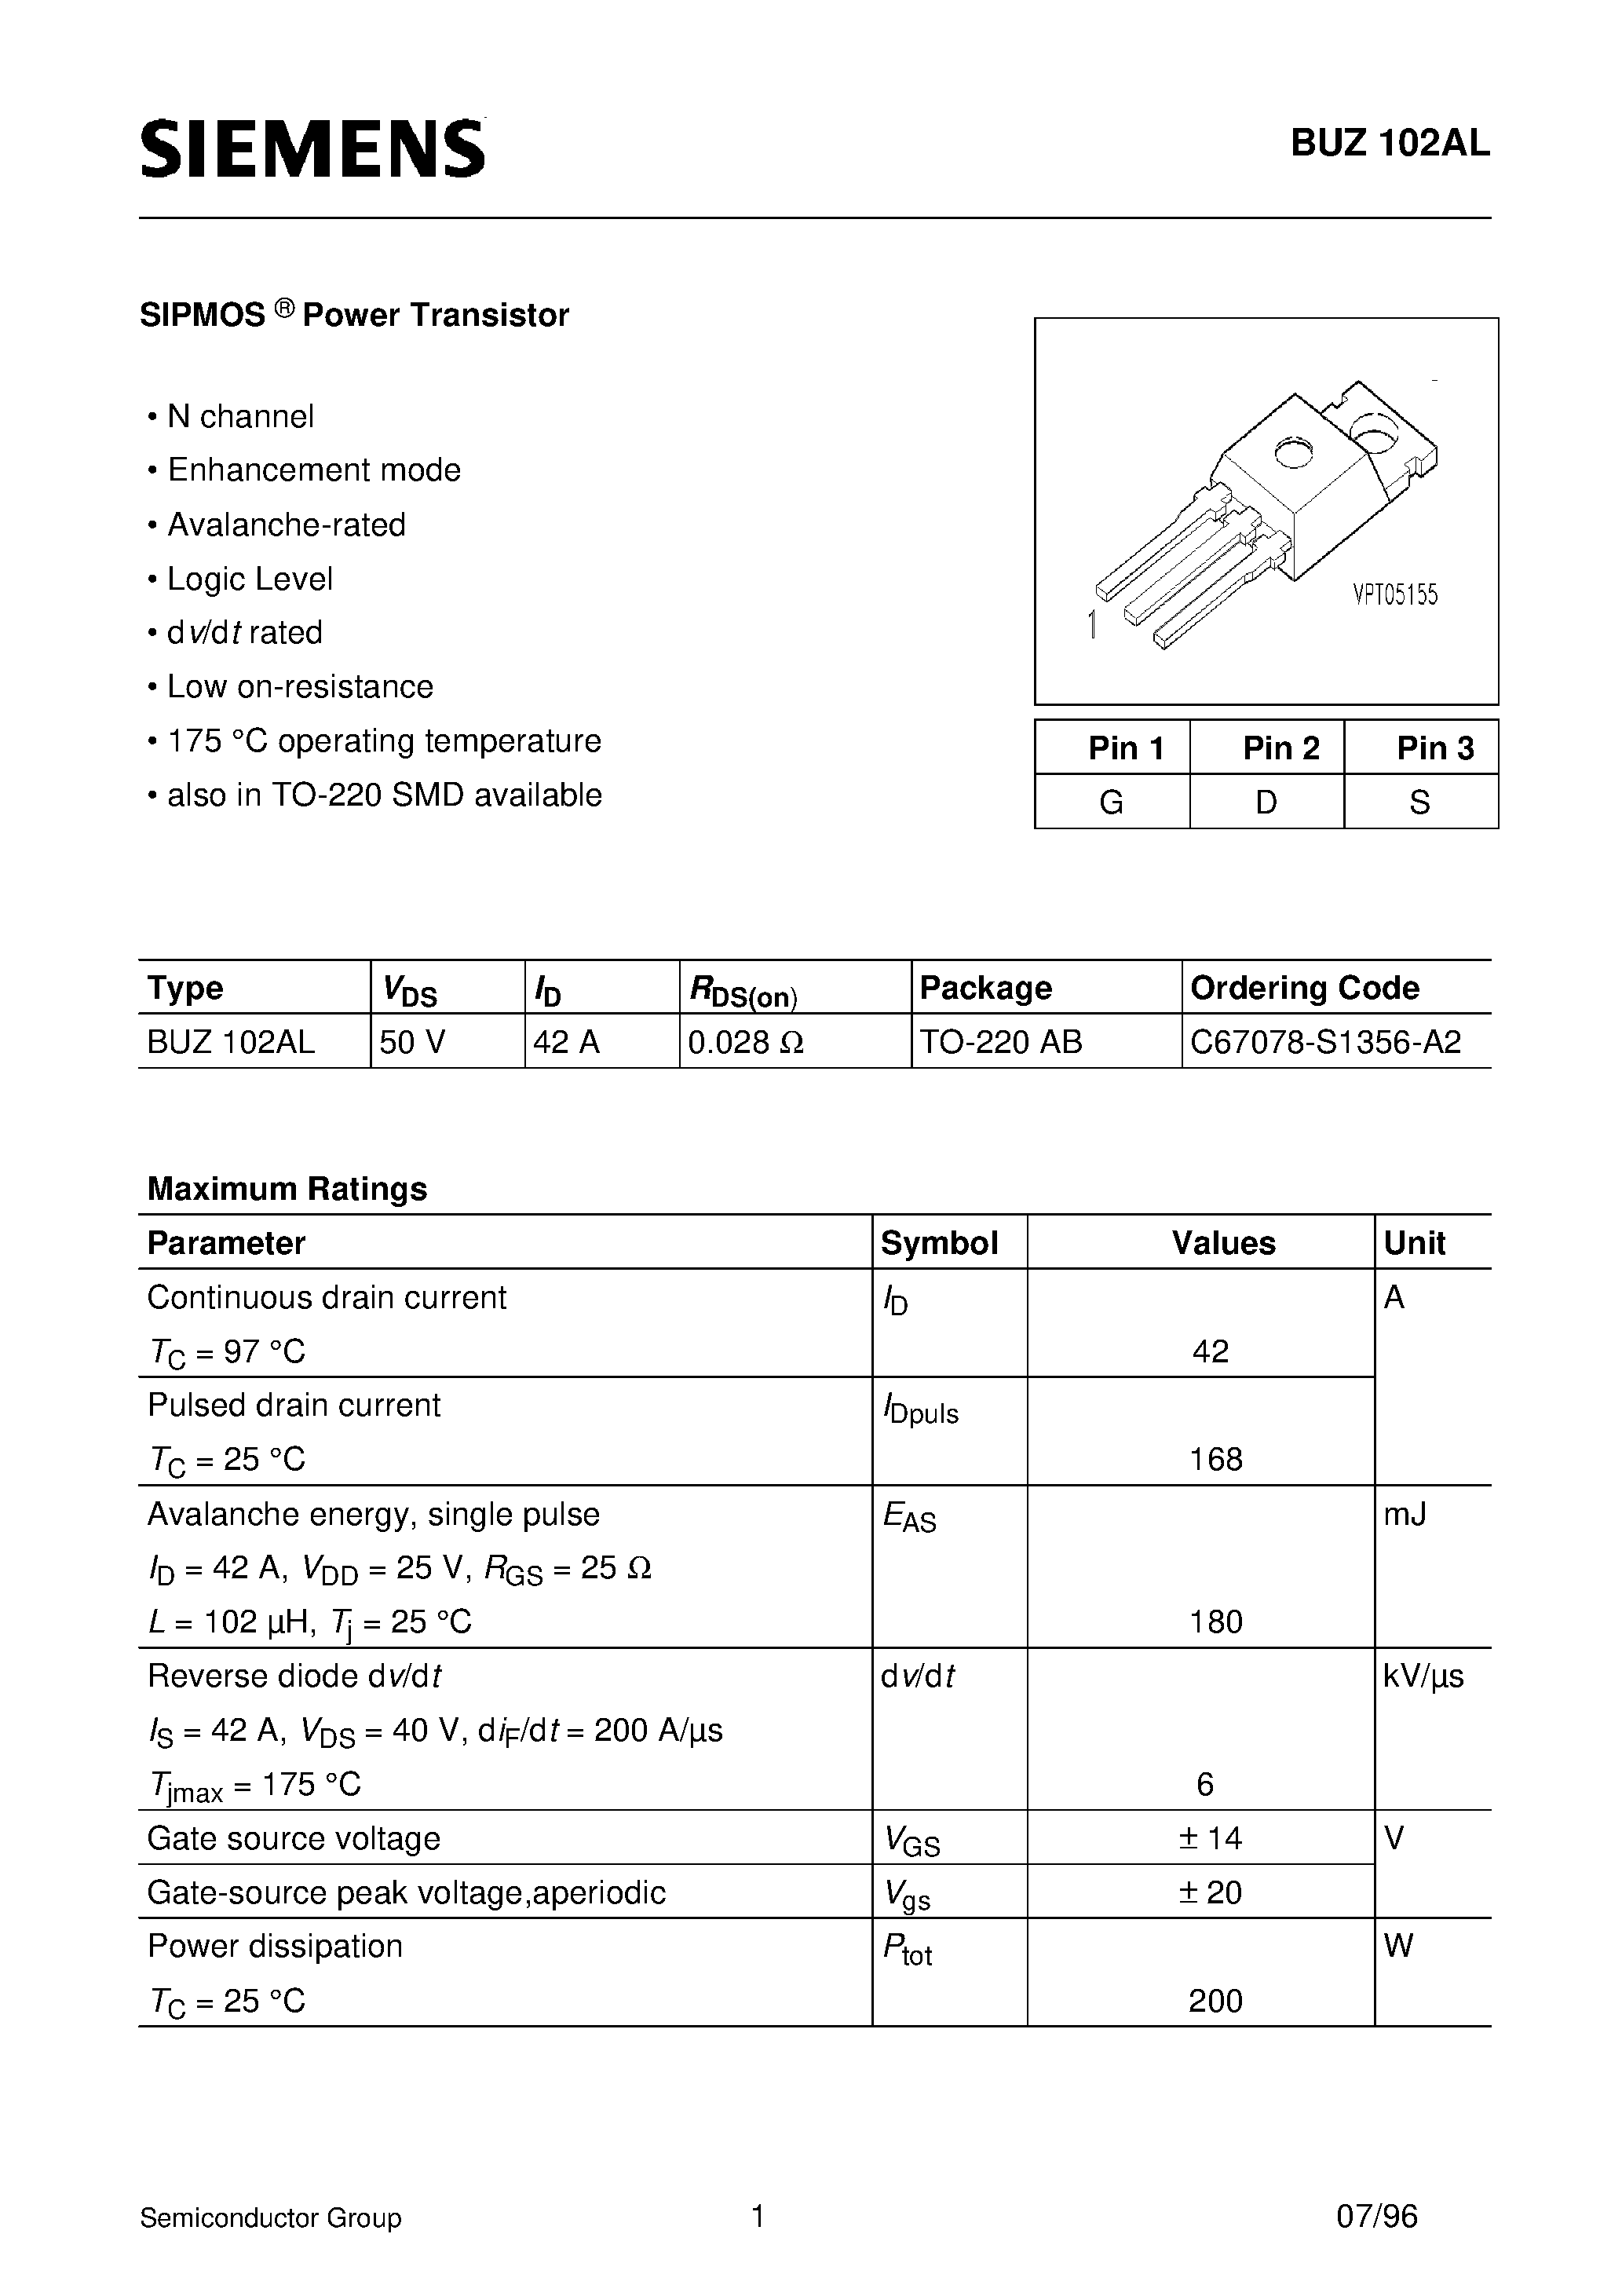 Datasheet BUZ102AL - SIPMOS Power Transistor (N channel Enhancement mode Avalanche-rated Logic Level d v/d t rated) page 1